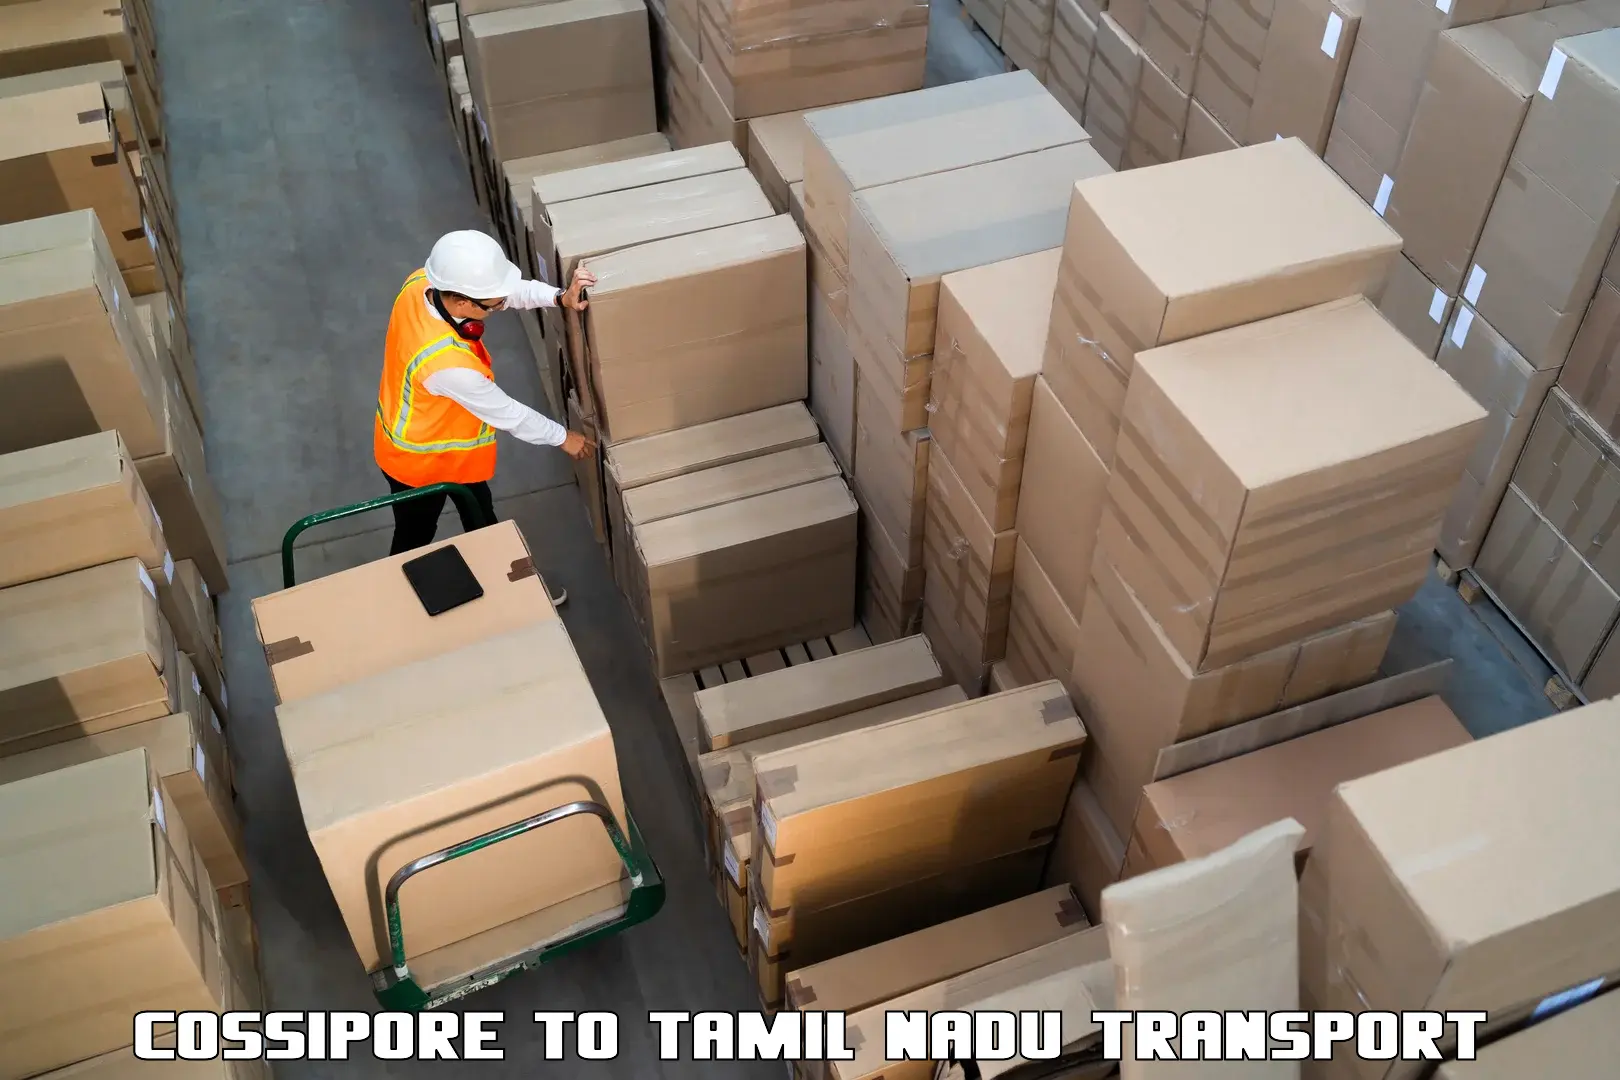 Cargo transportation services Cossipore to Ennore Port Chennai